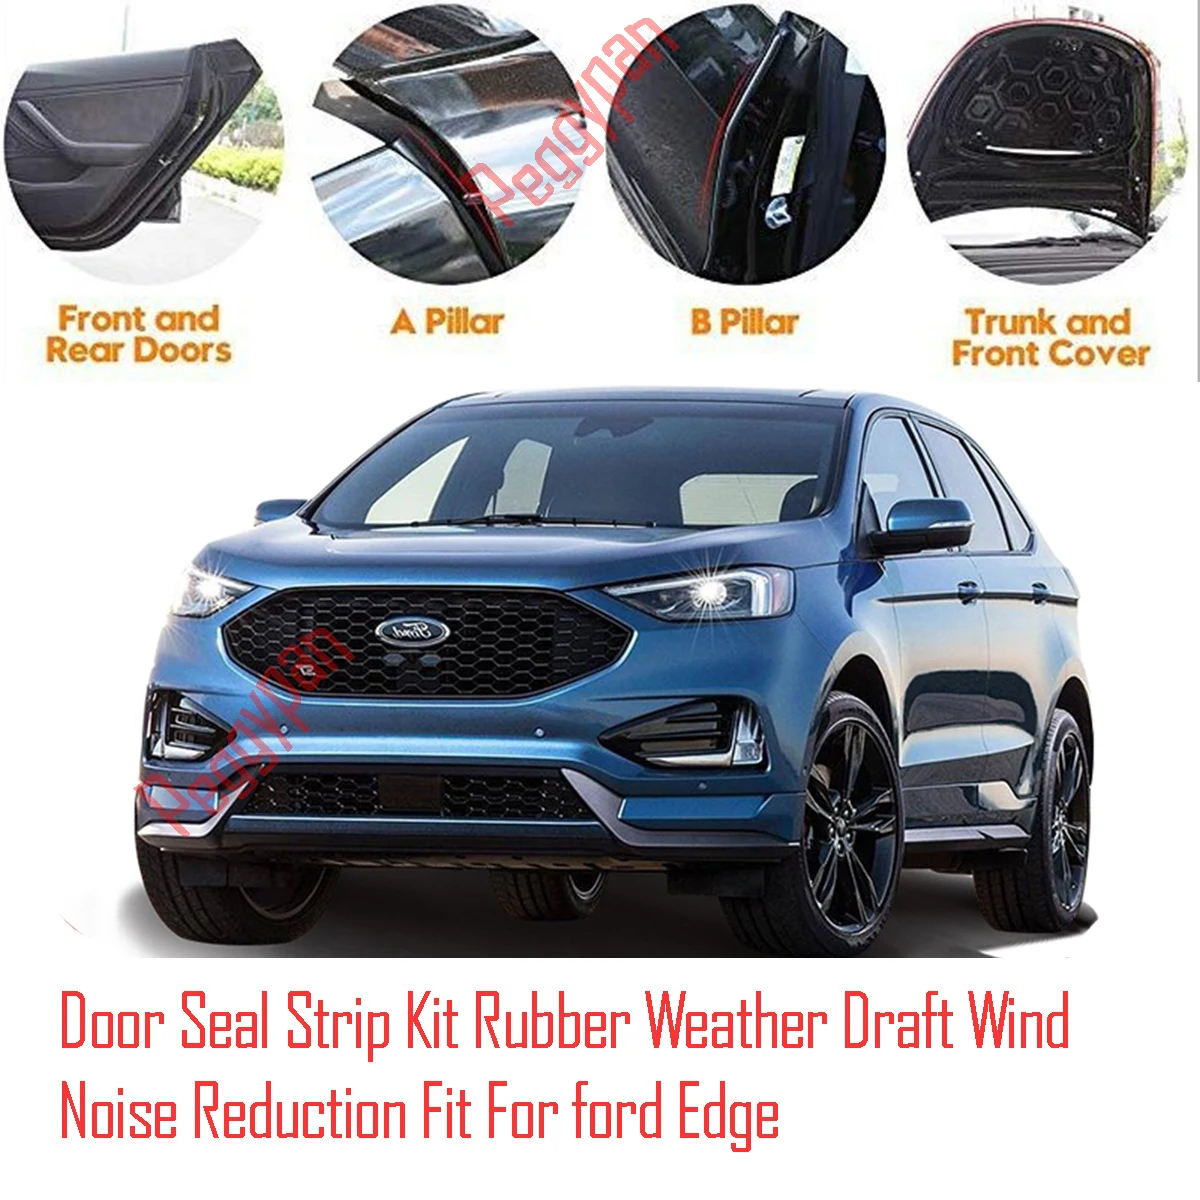 Door Seal Strip Kit Self Adhesive Window Engine Cover Soundproof Rubber Weather Draft Wind Noise Reduction Fit For Ford Edge